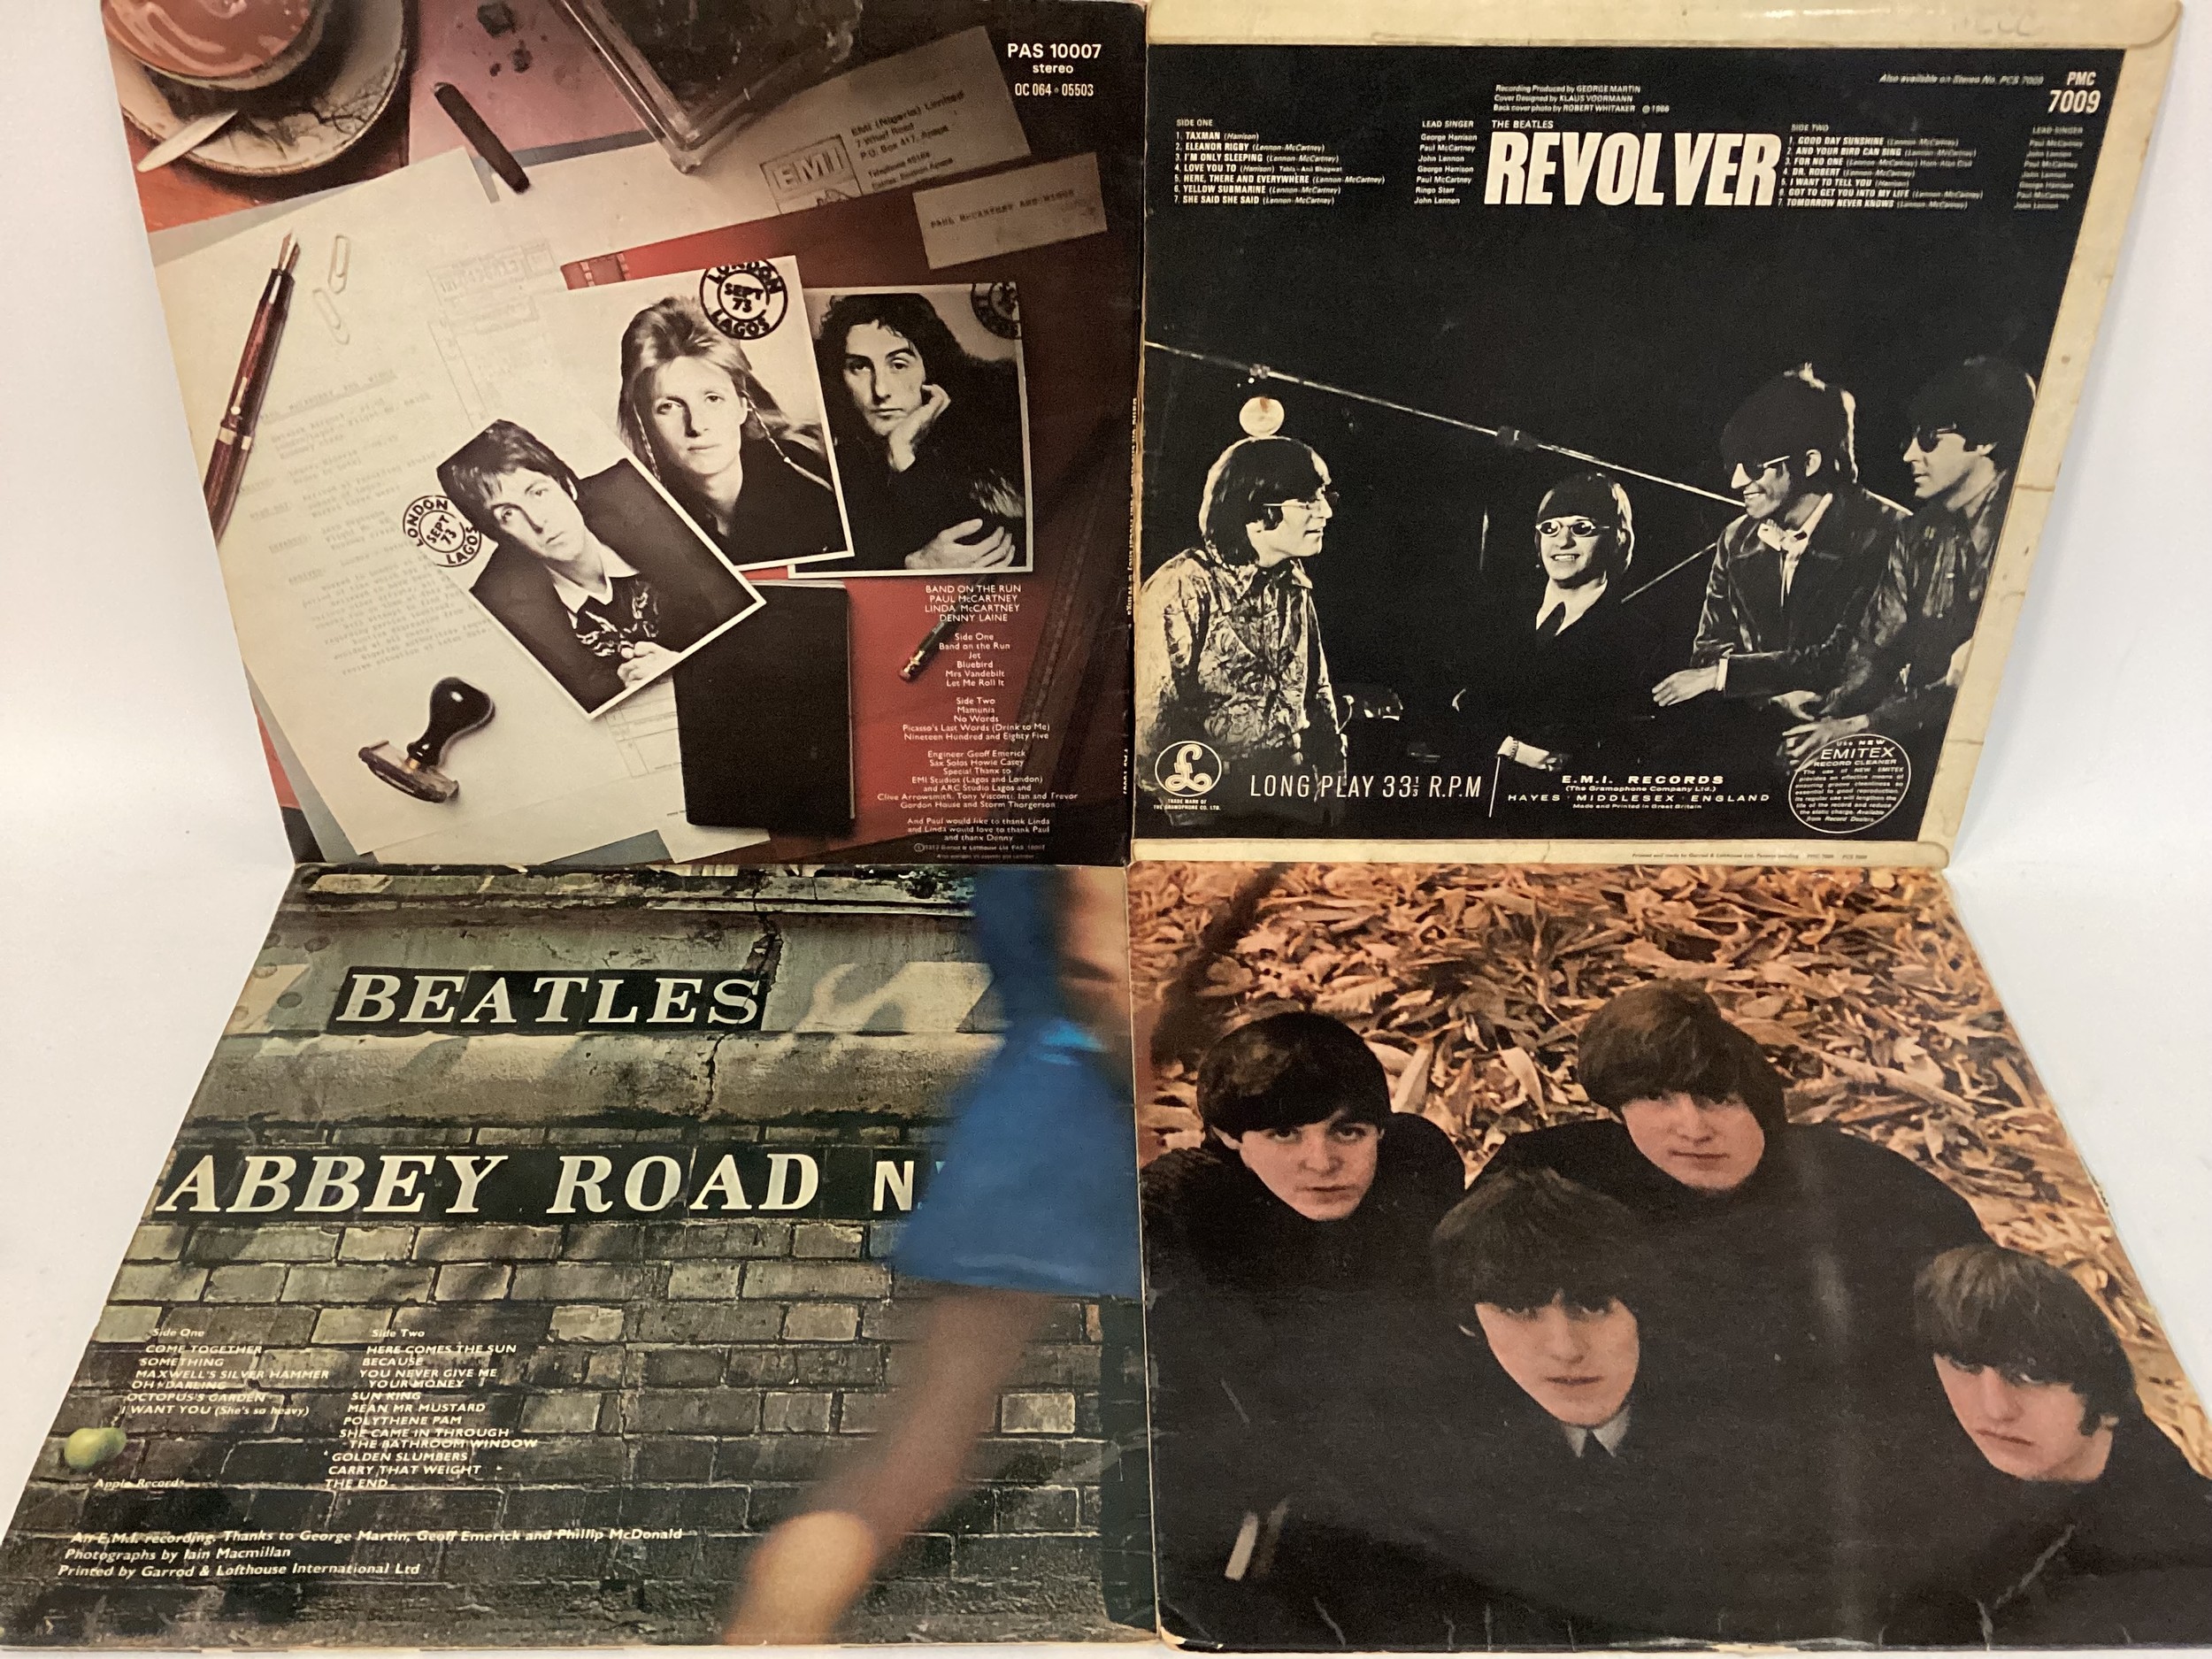 THE BEATLES VINYL RELATED LP RECORDS X 4. Copies here include - Abbey Road - Revolver - Beatles - Image 2 of 2